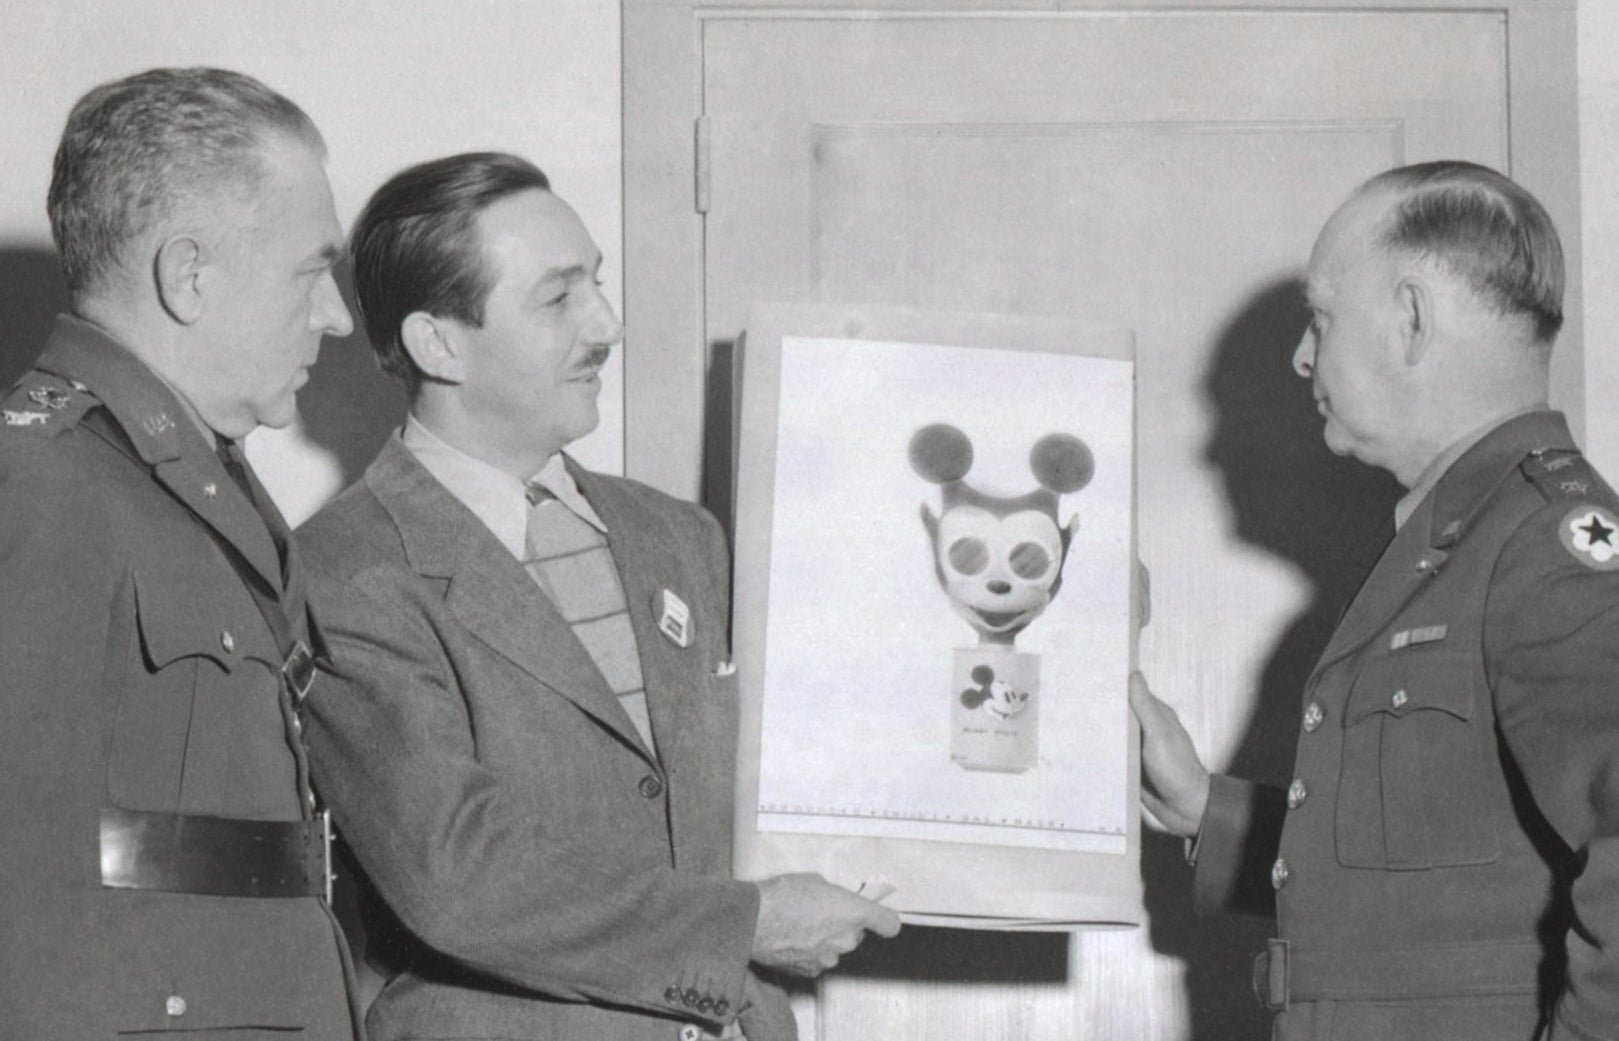 Three men in military uniforms looking at a Mickey Mouse gas mask sketch